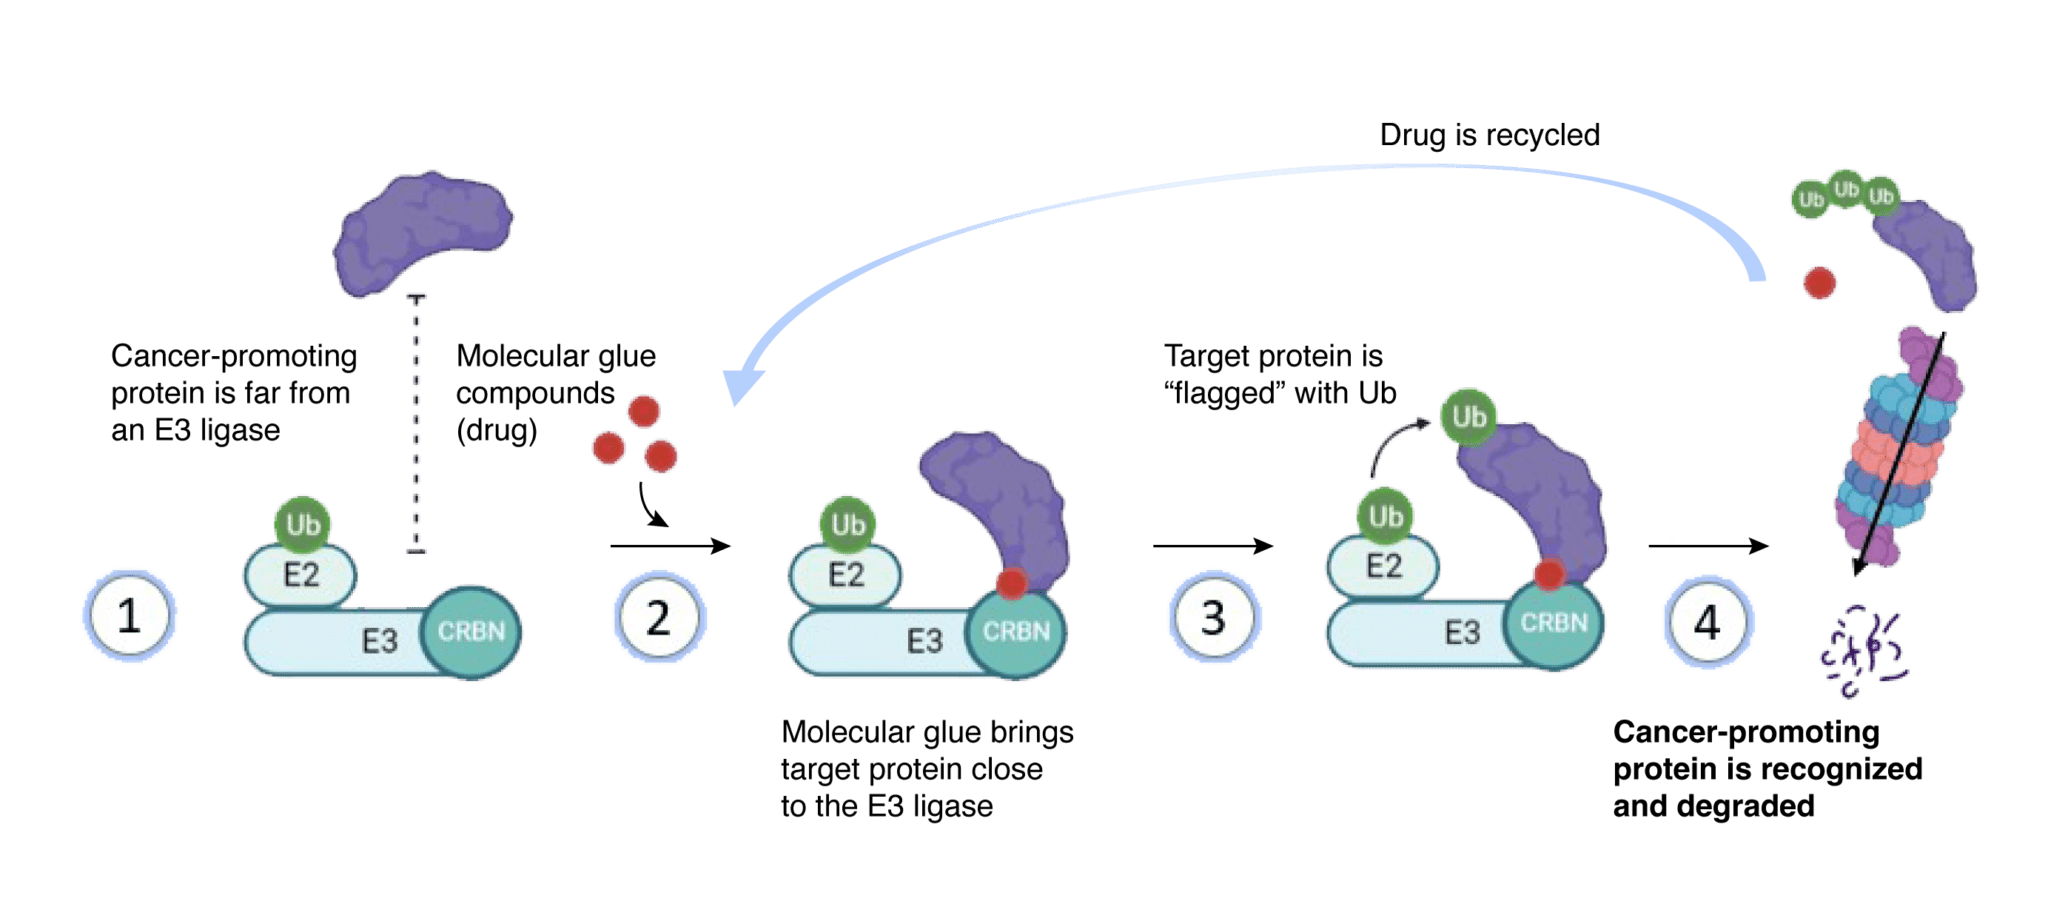 First, cancer-promoting protein is far from an E3 ligase. Second, molecular glue compounds (drug) bring target protein close to the E3 ligase. Third, target protein is flagged with Ub. Fourth, cancer-promoting protein is recognized and degraded. Drug is recycled.